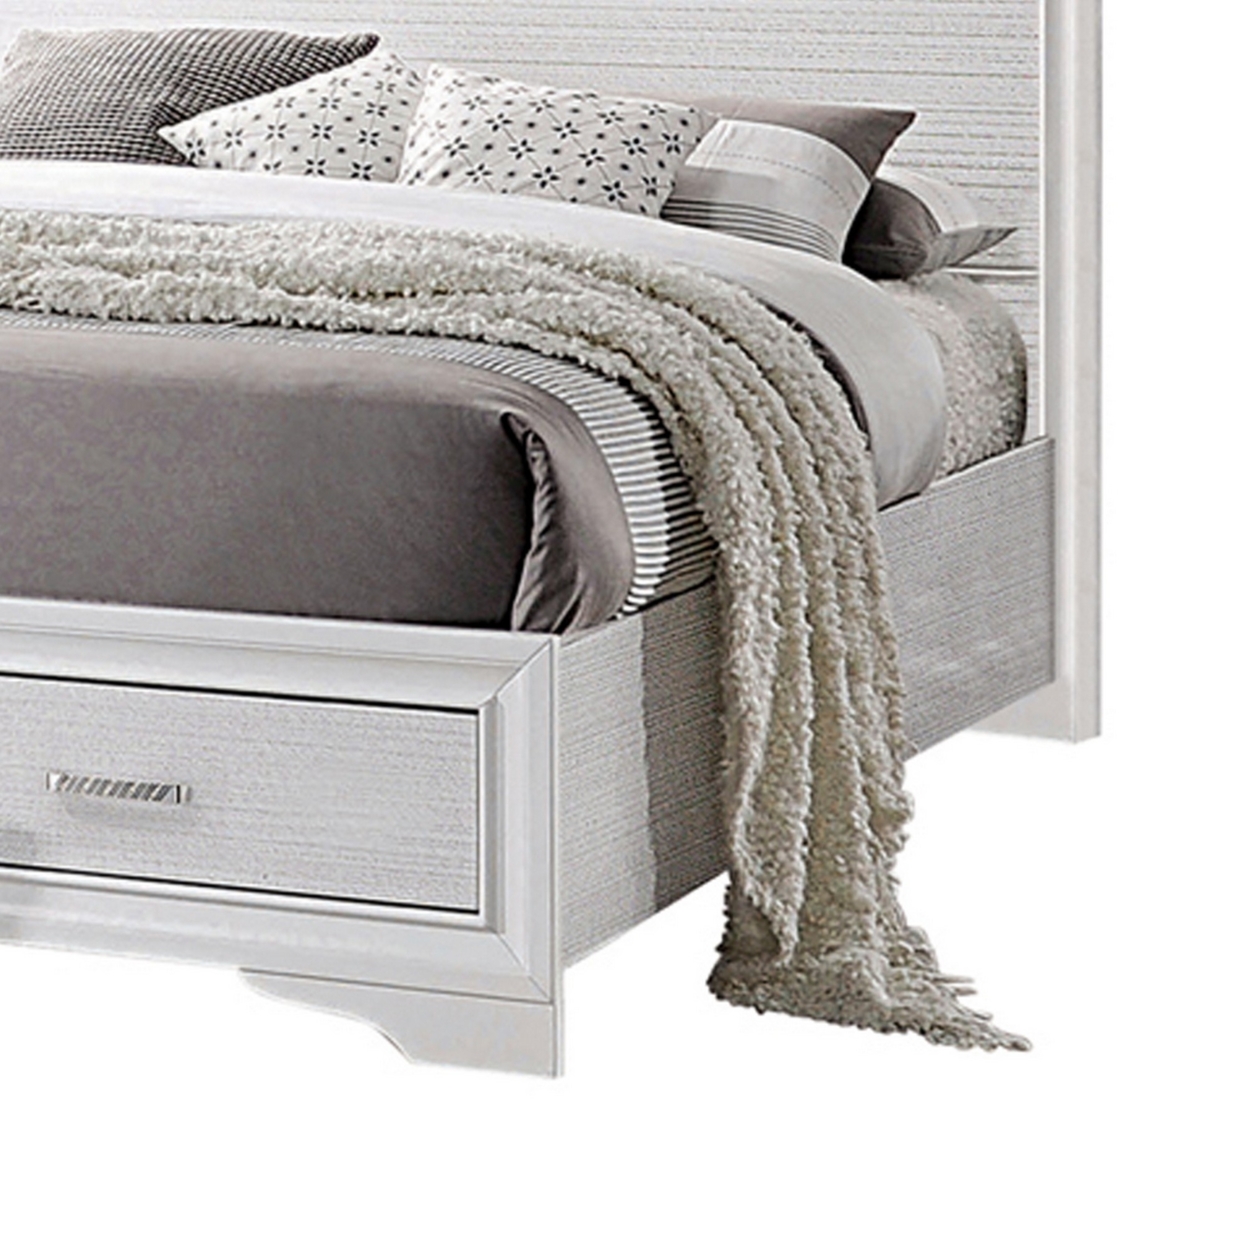 Contemporary California King Bed With Drawers And Glittering Stripes, White- Saltoro Sherpi